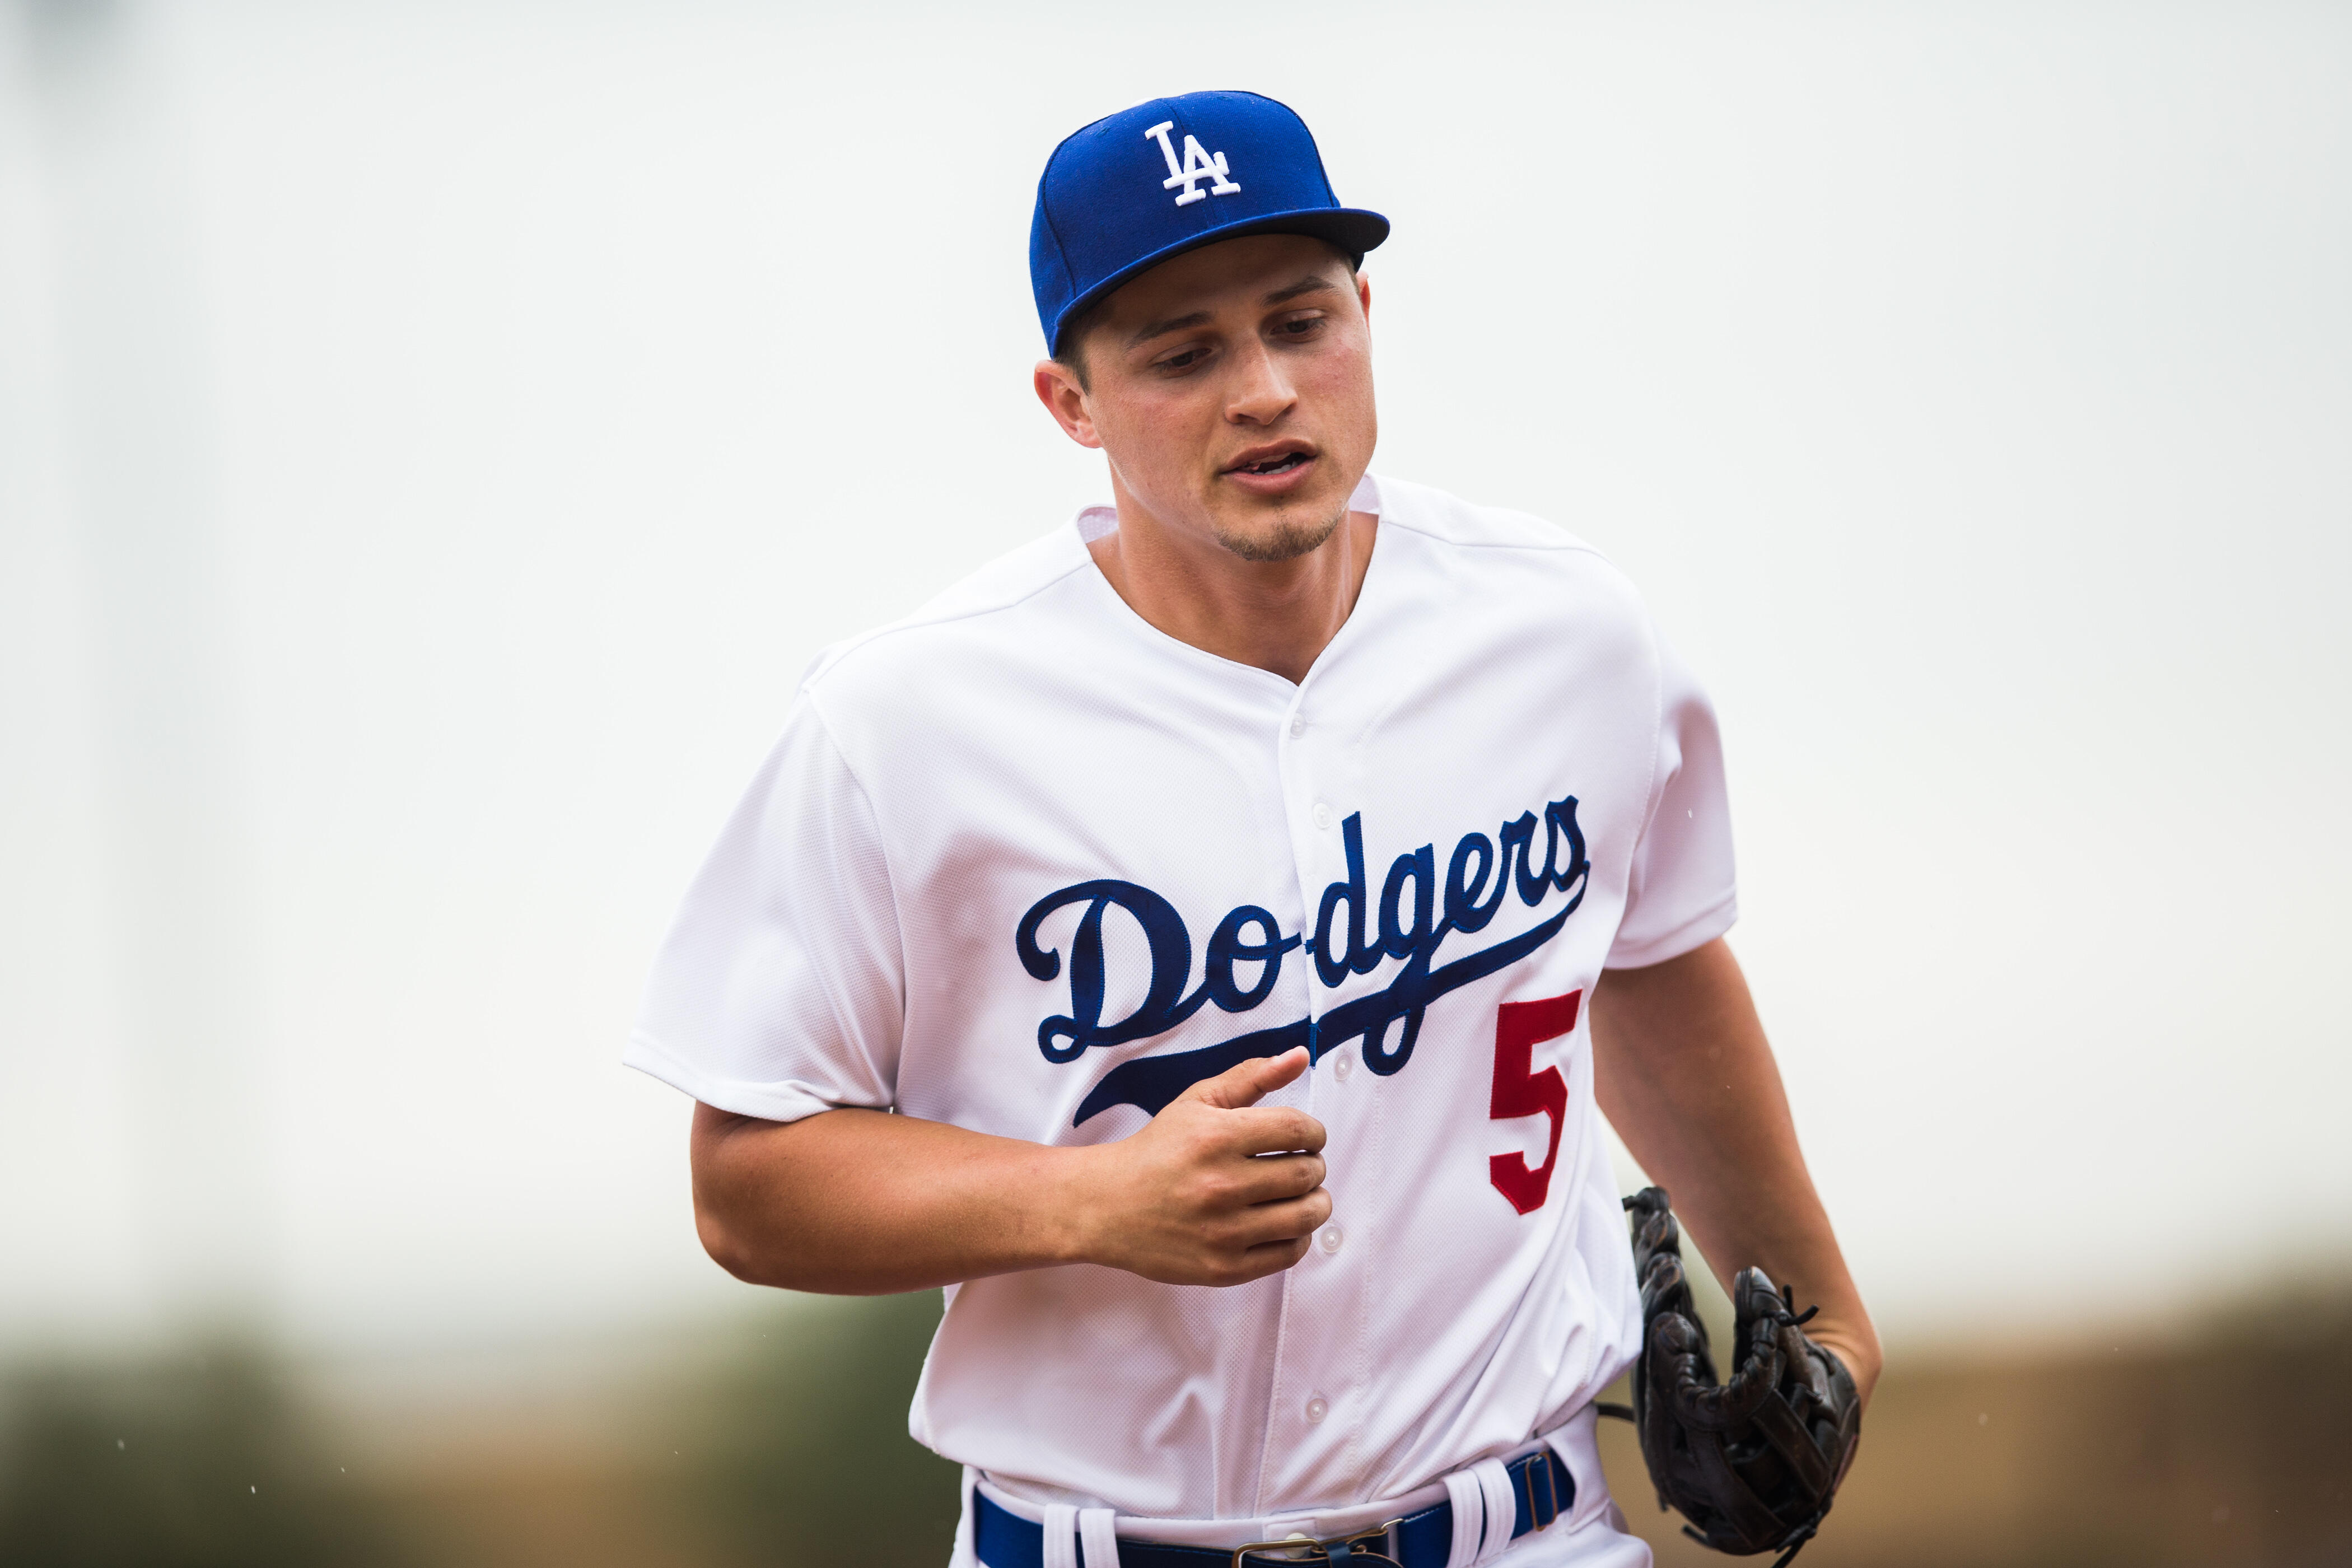 GLENDALE, AZ - FEBRUARY 27:  Corey Seager #5 of the Los Angeles Dodgers looks on during a spring training game against the Colorado Rockies at Camelback Ranch on February 27, 2017 in Glendale, Arizona. (Photo by Rob Tringali/Getty Images)